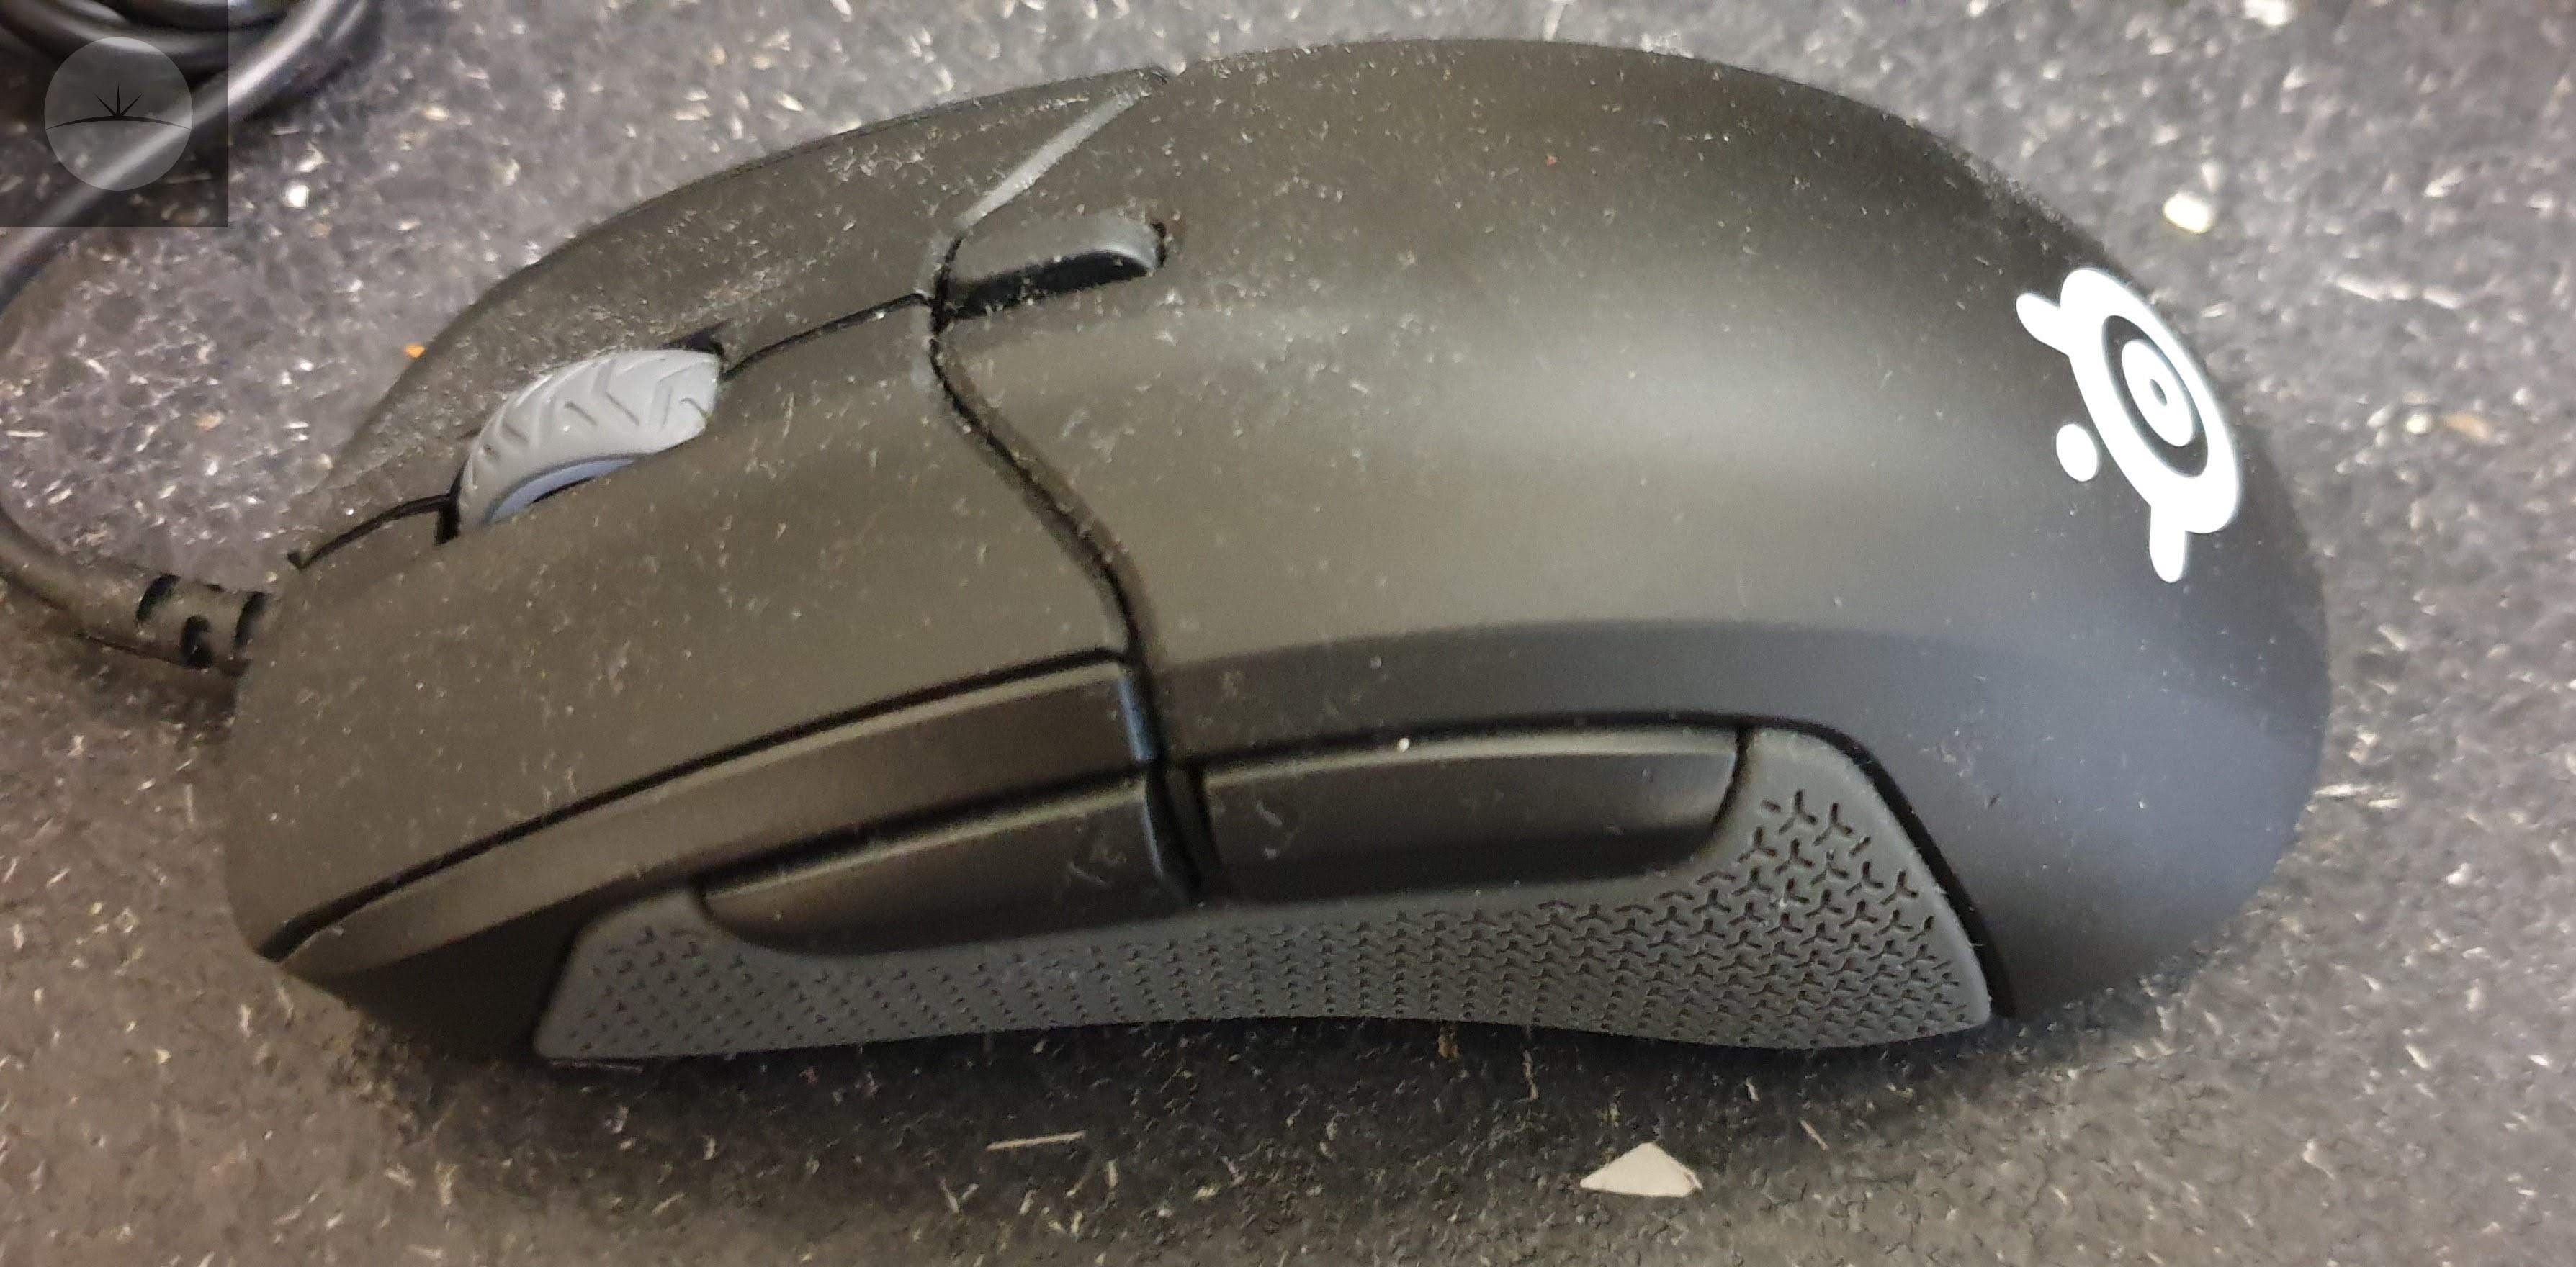 Rival 310 Gaming Mouse from SteelSeries Review